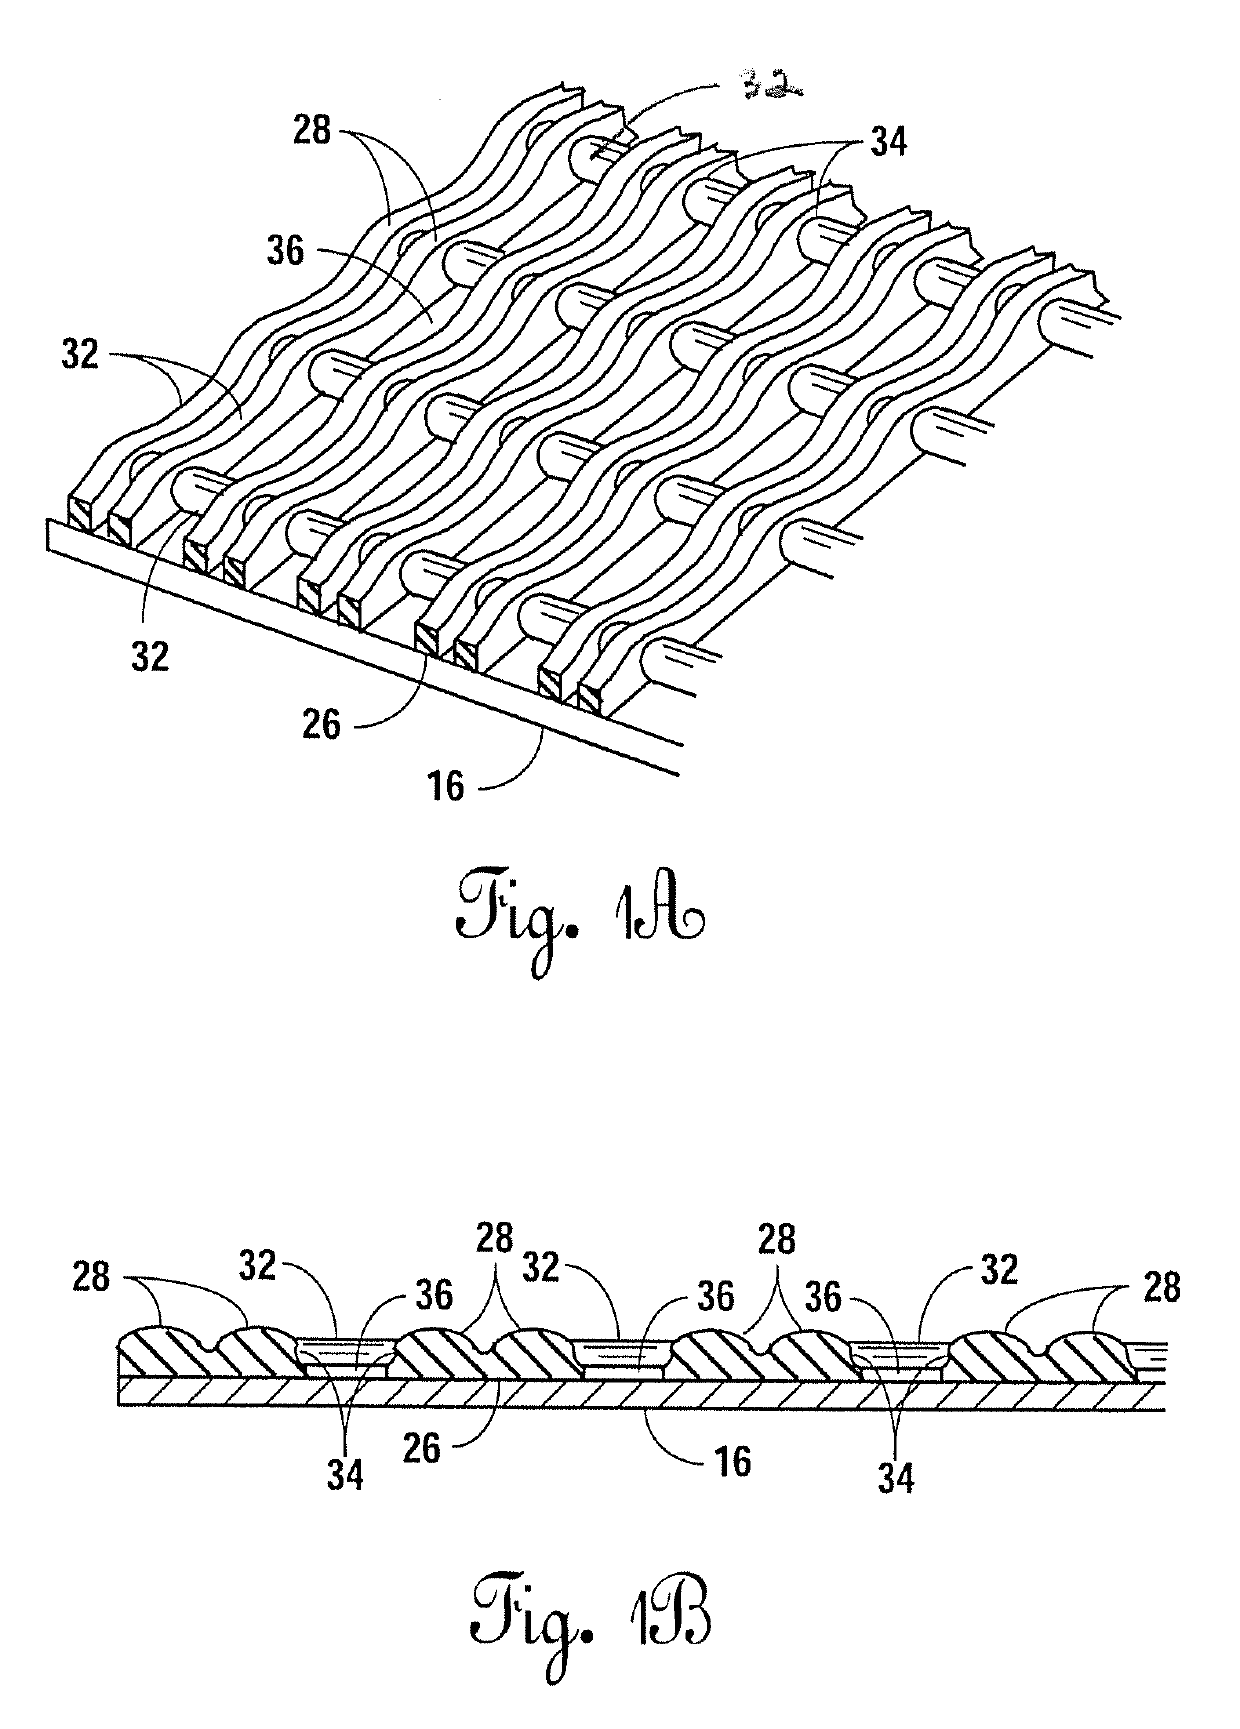 Support assembly for engaging a small electronic device